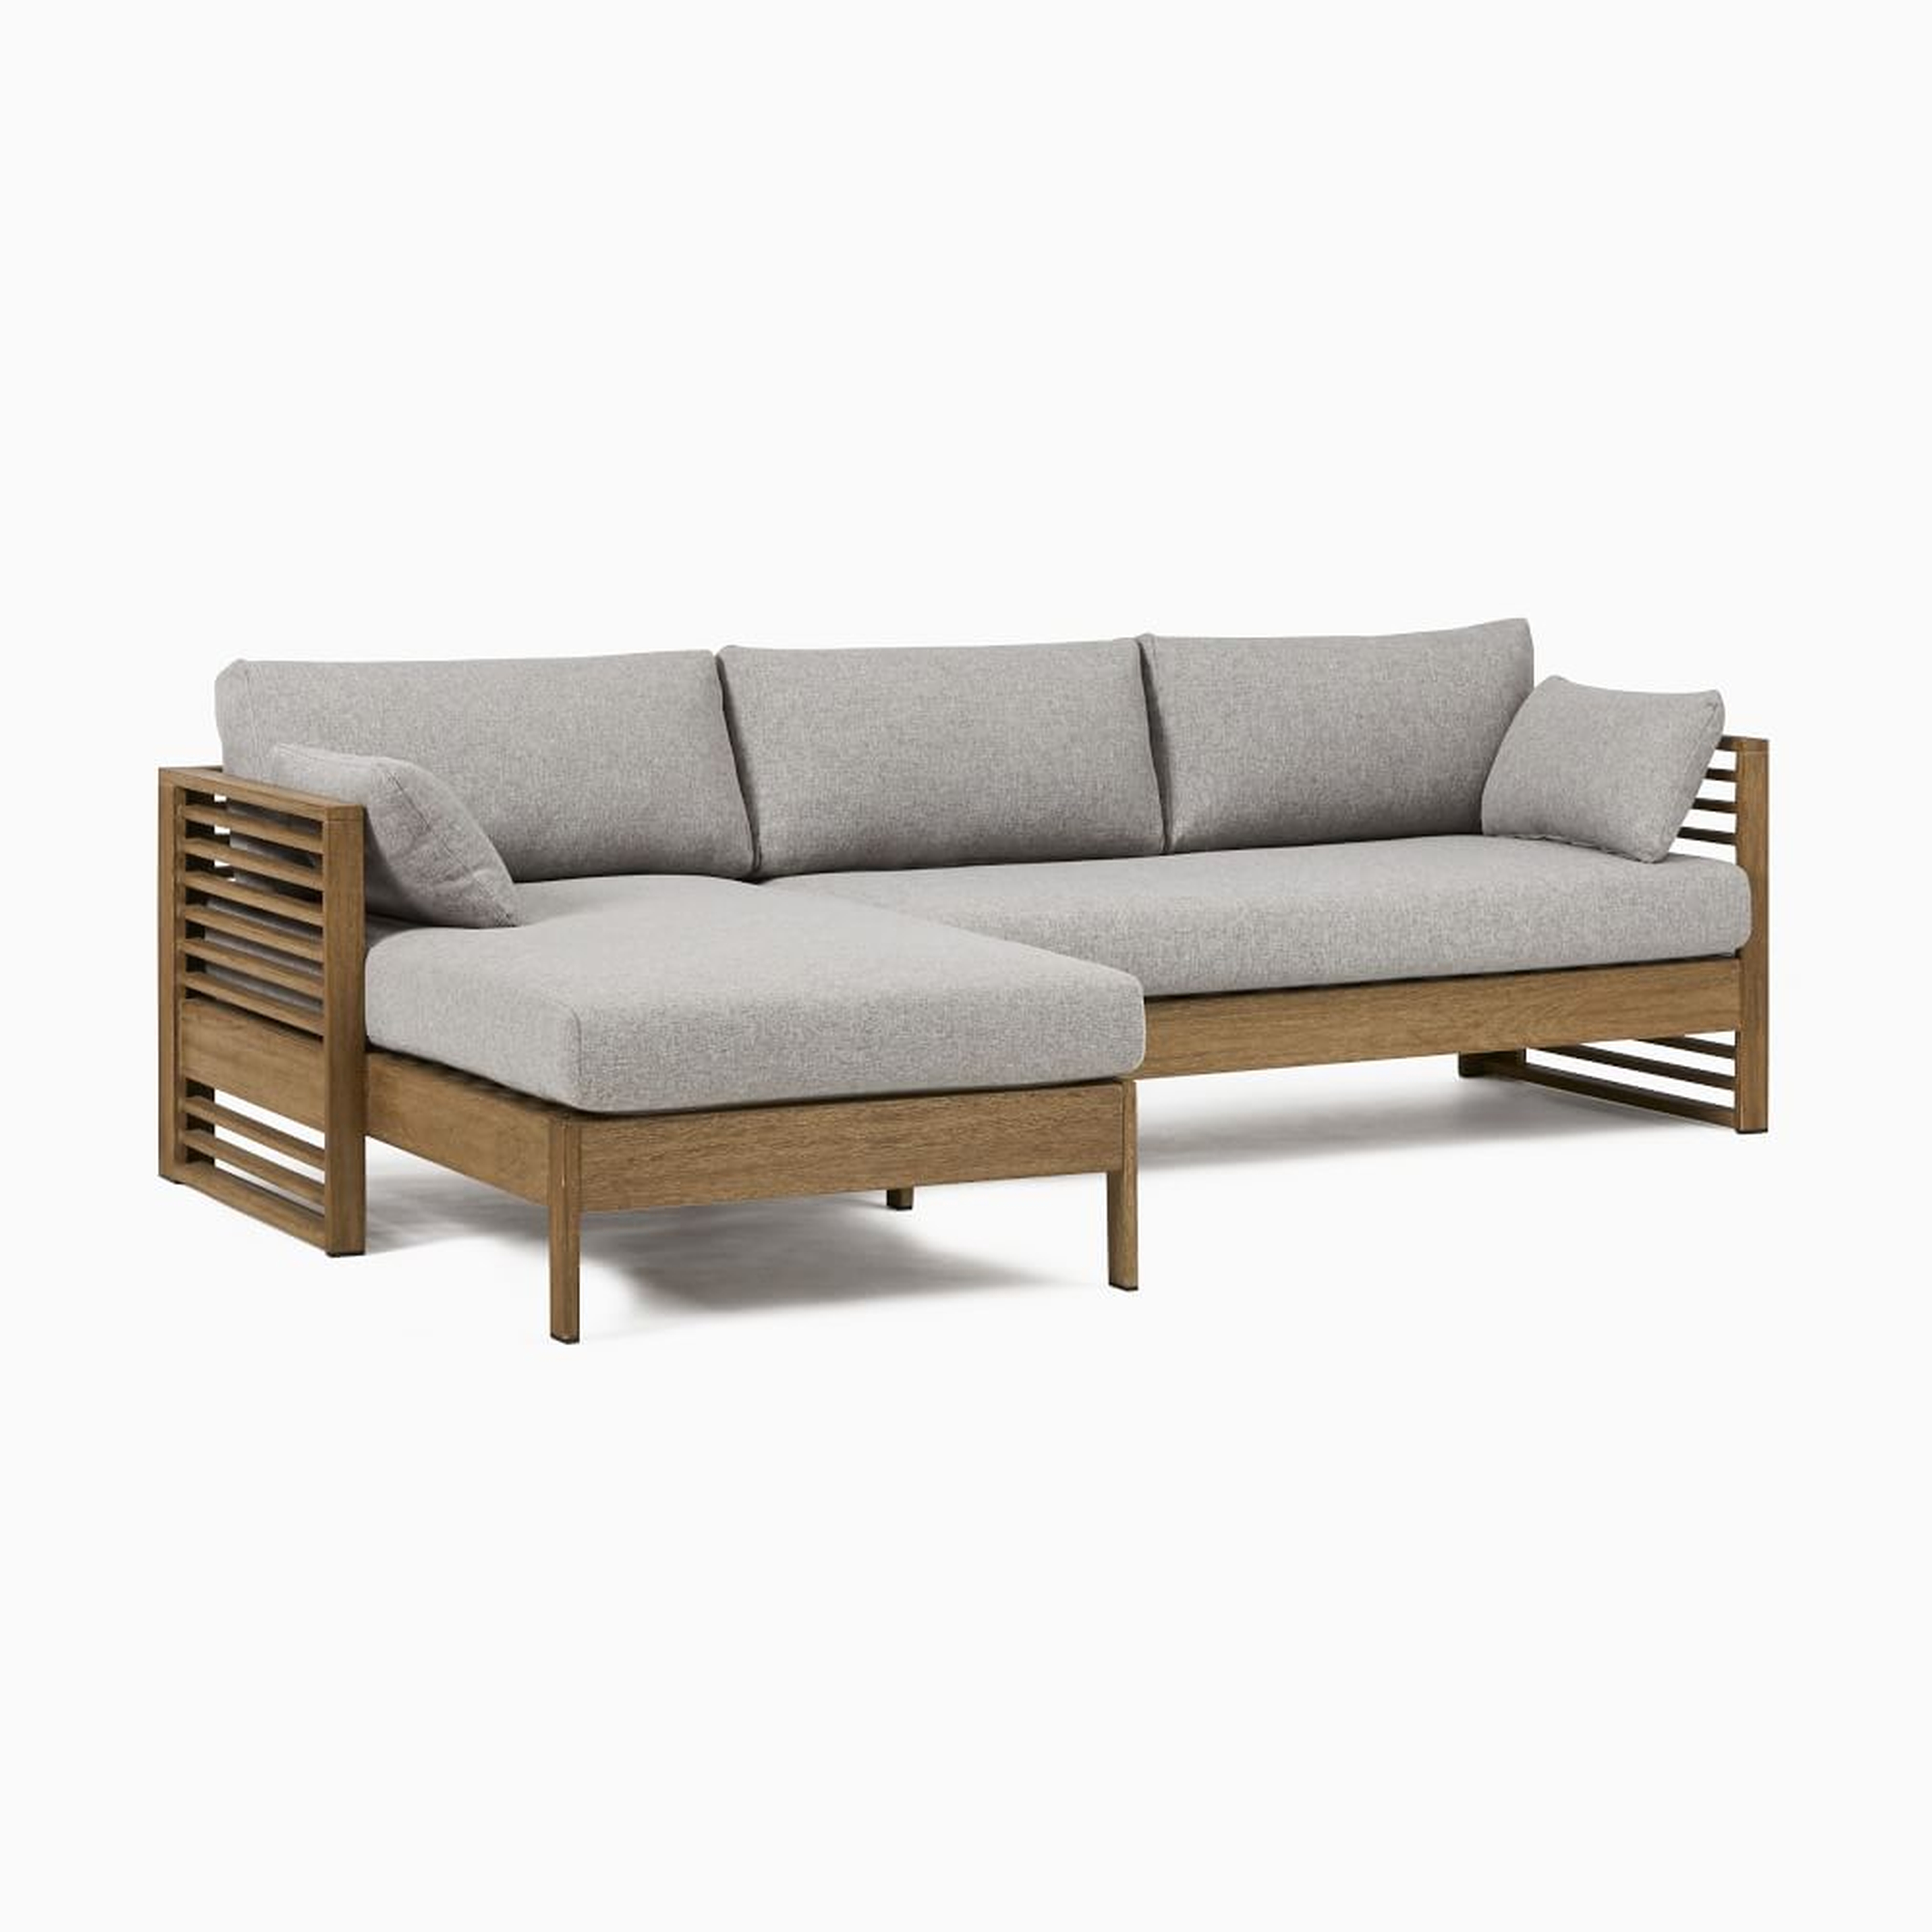 Santa Fe Slatted Outdoor 95 in 2-Piece Chaise Sectional, Driftwood - West Elm